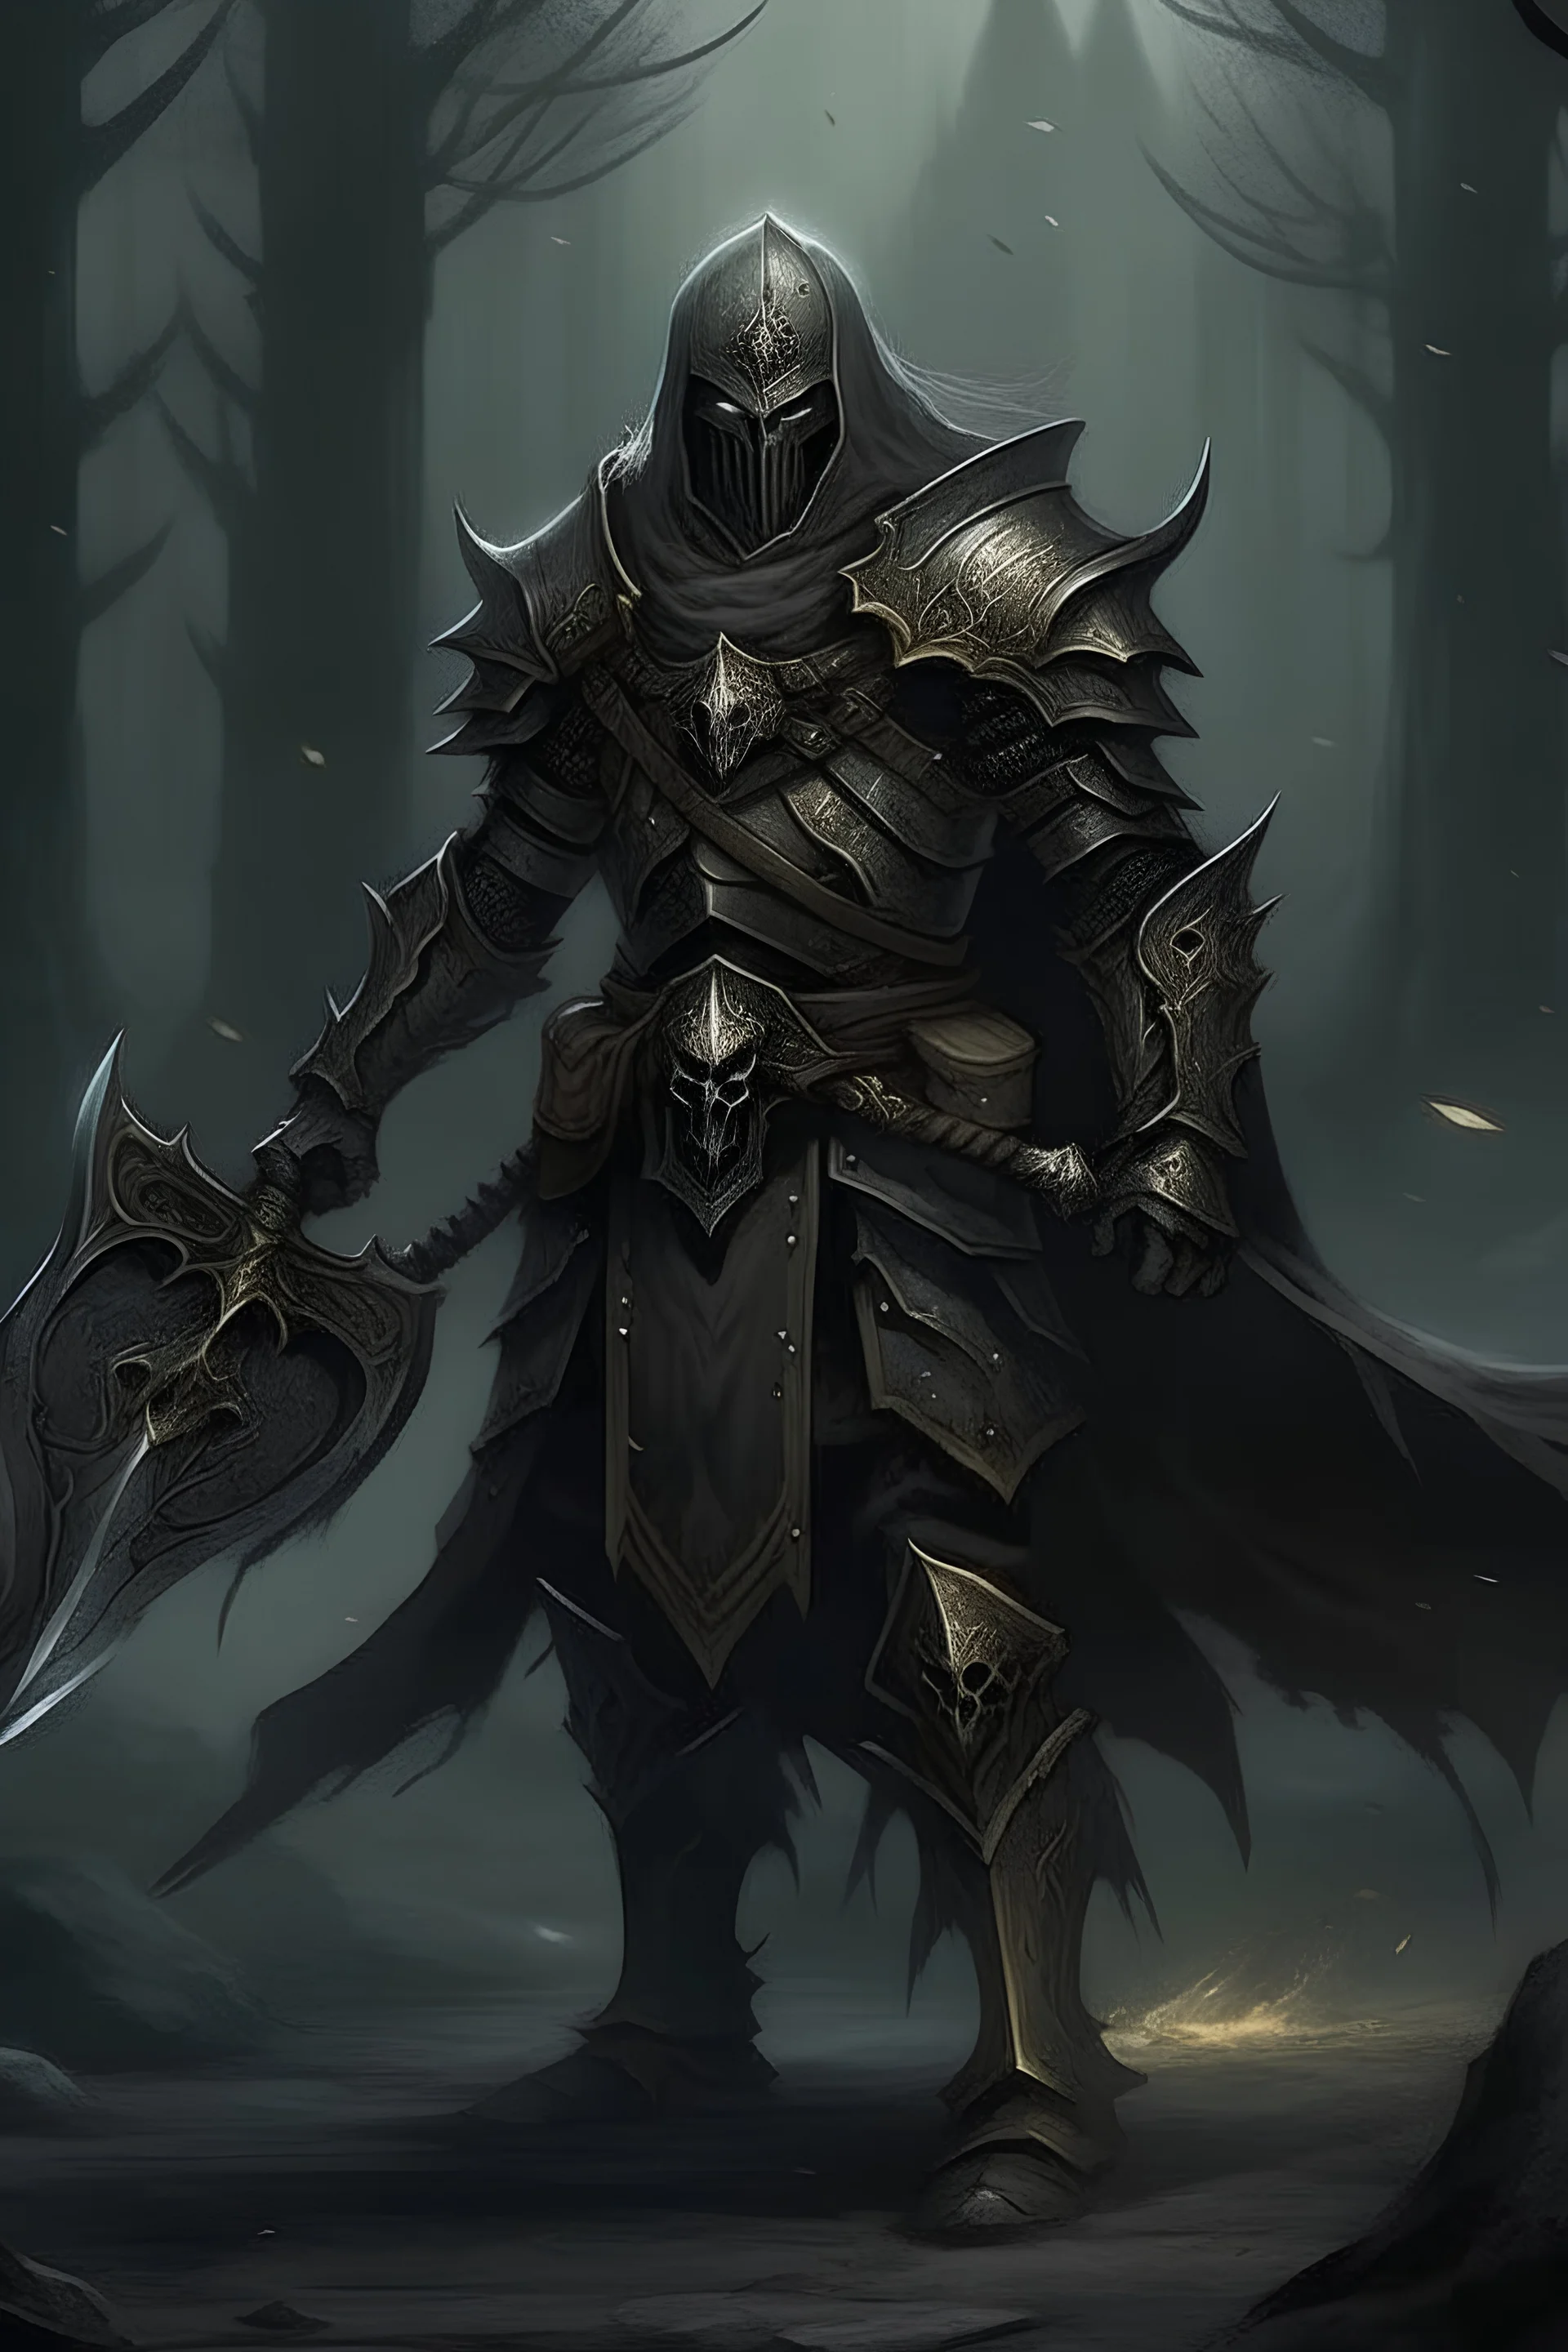 defeated paladin in a dark fantasy style